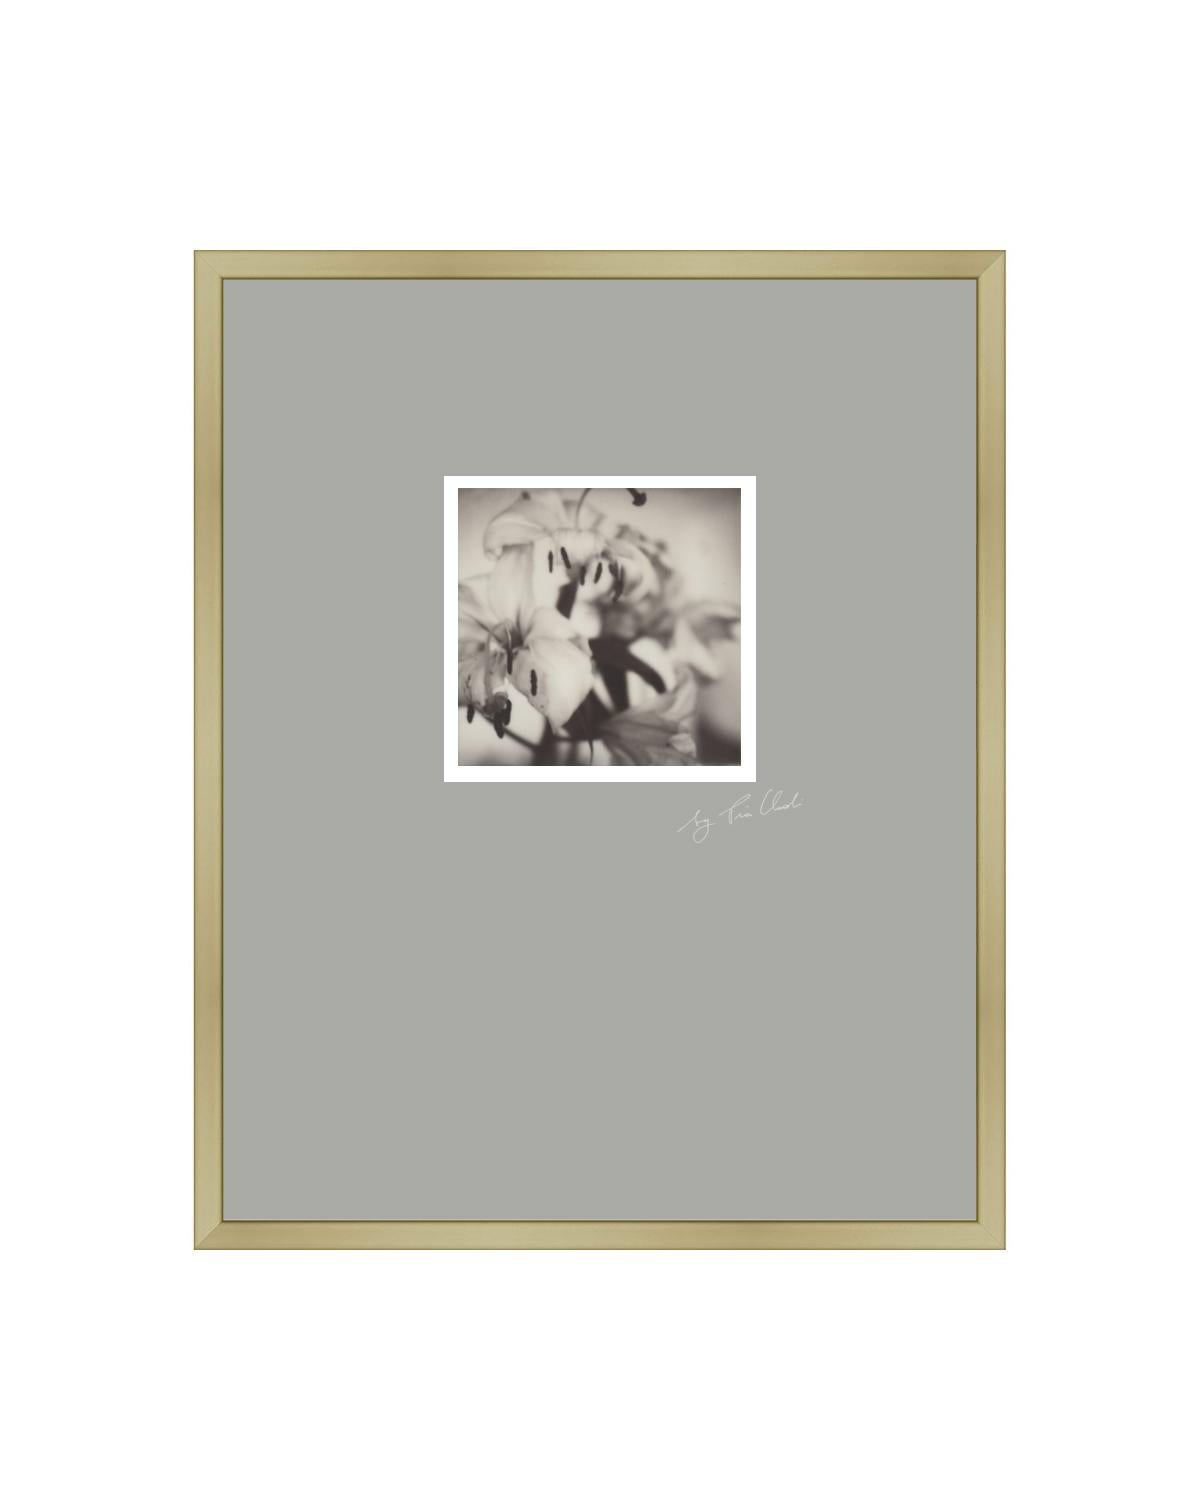 Past Bloom III - Contemporary Black & White Polaroid Original Photograph Framed - Gray Black and White Photograph by Pia Clodi